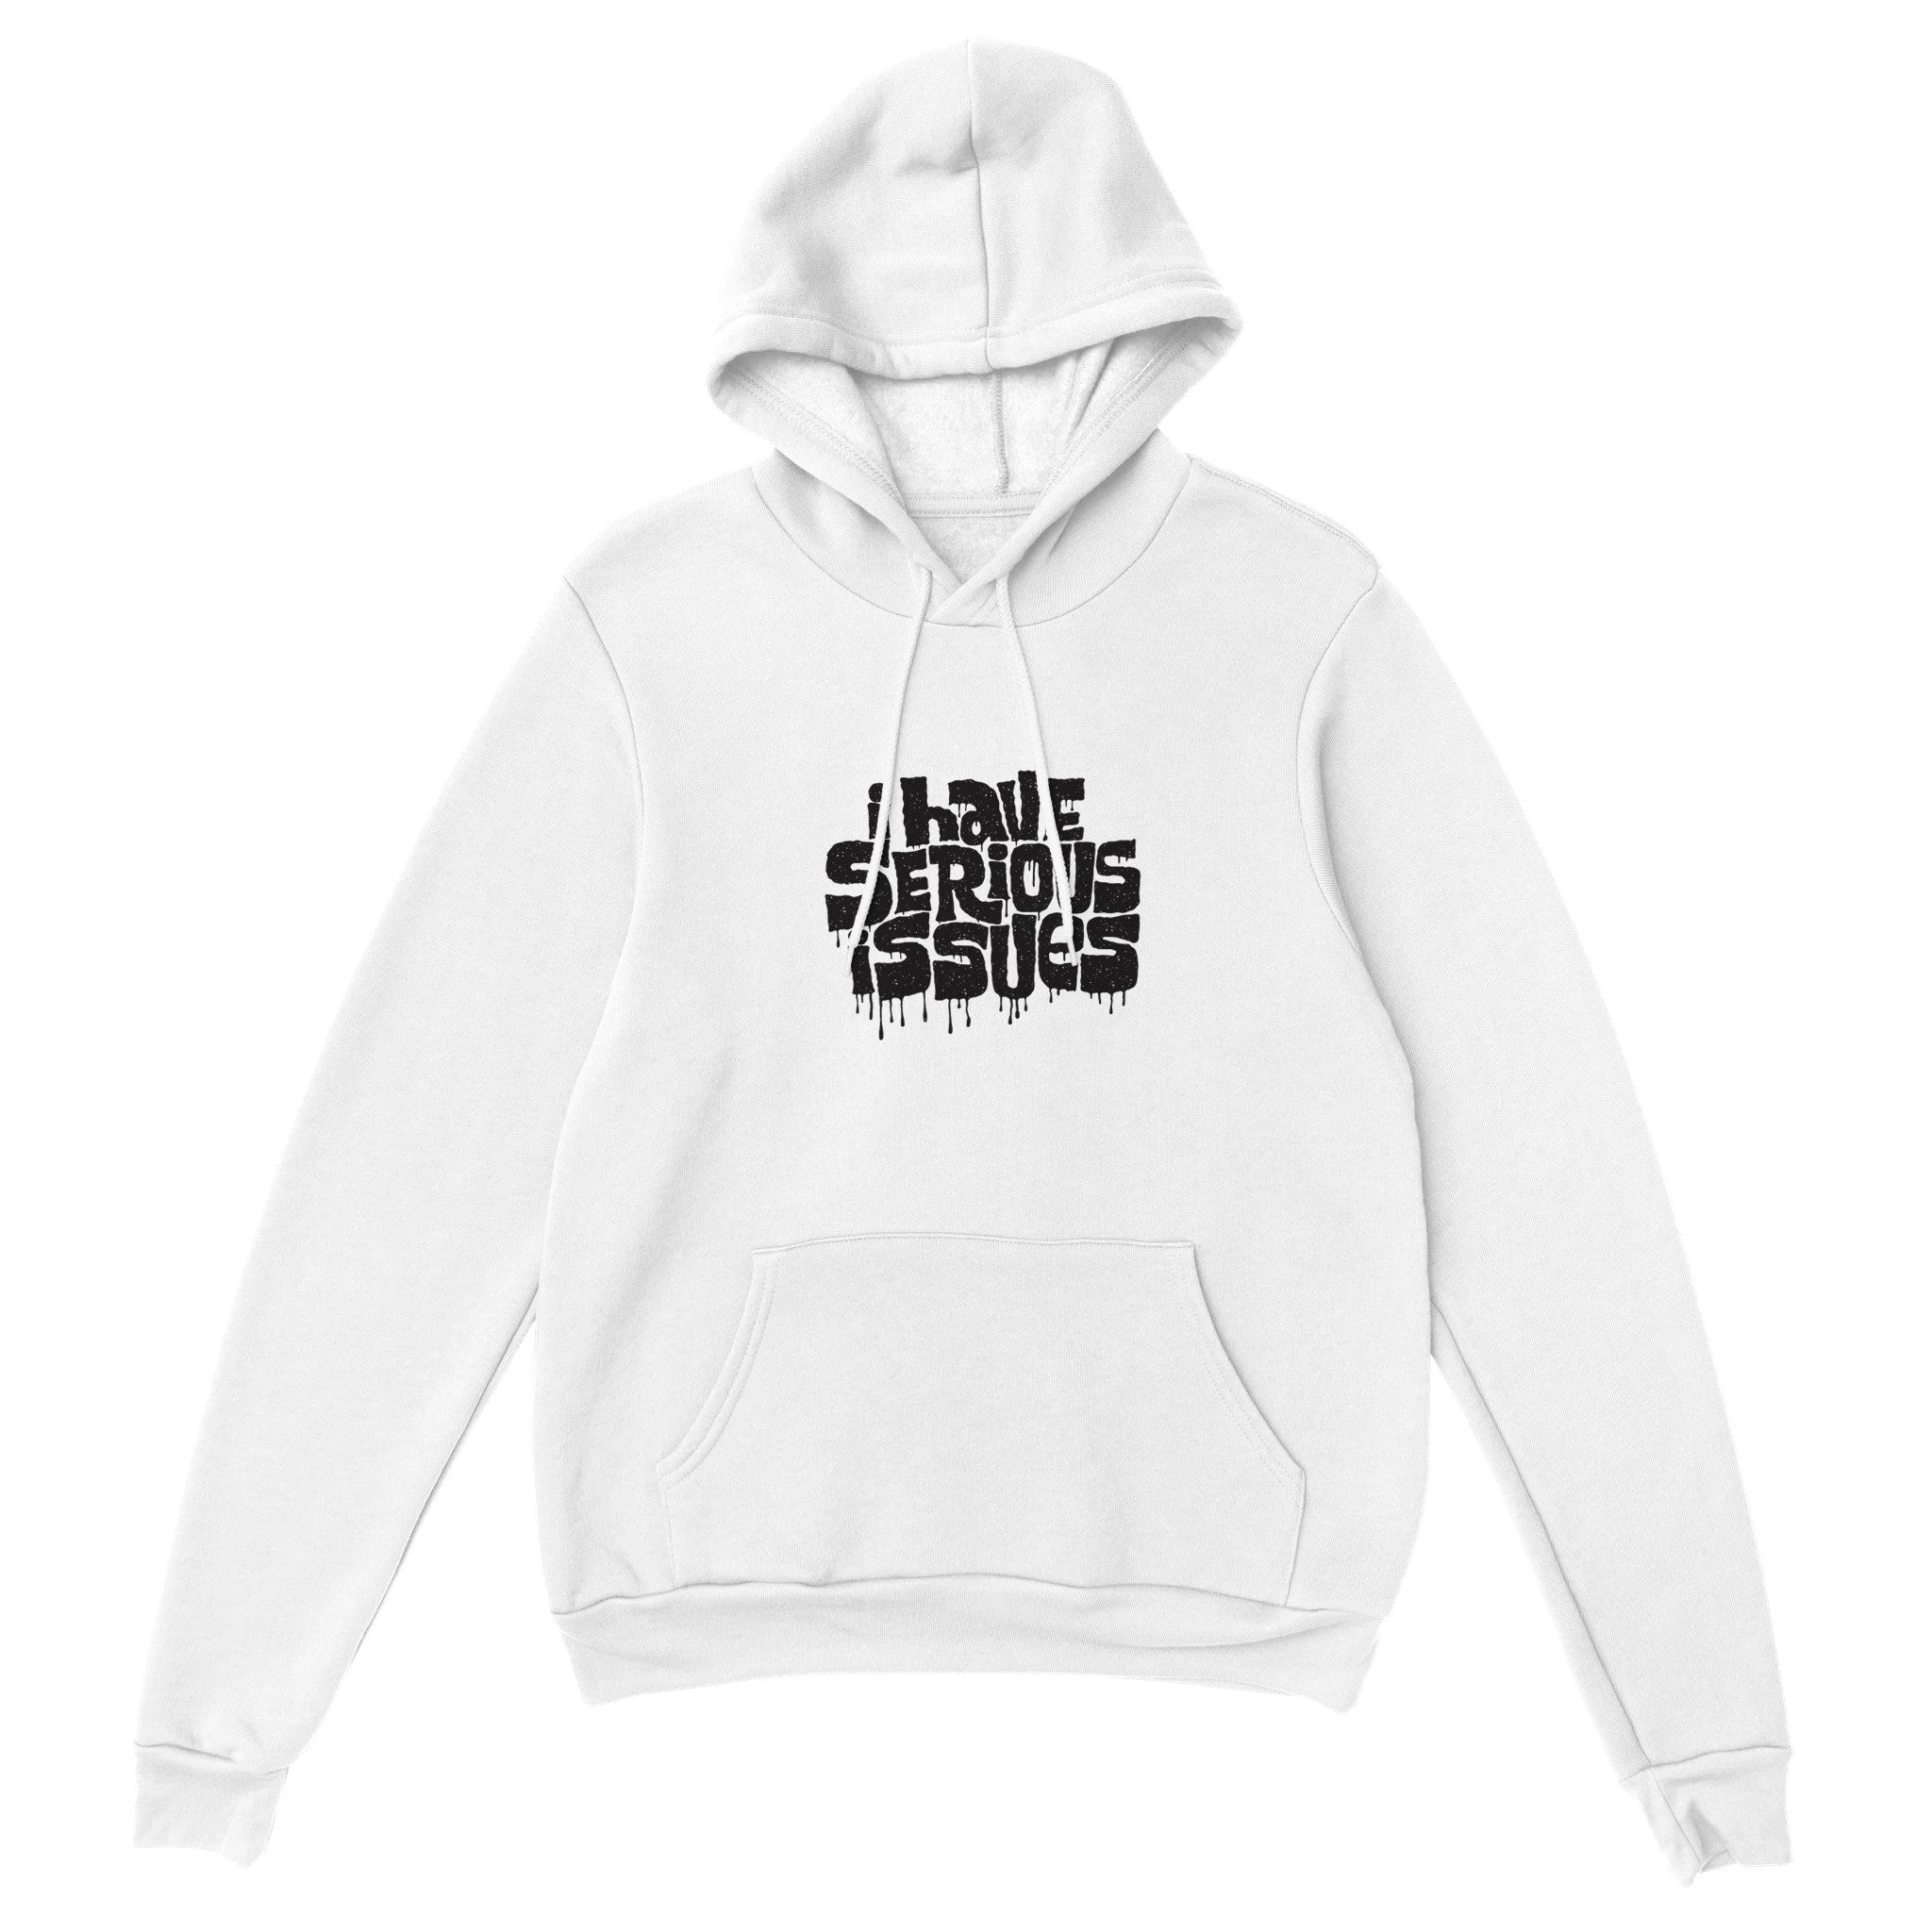 SERIOUS ISSUES Pullover Hoodie - Optimalprint